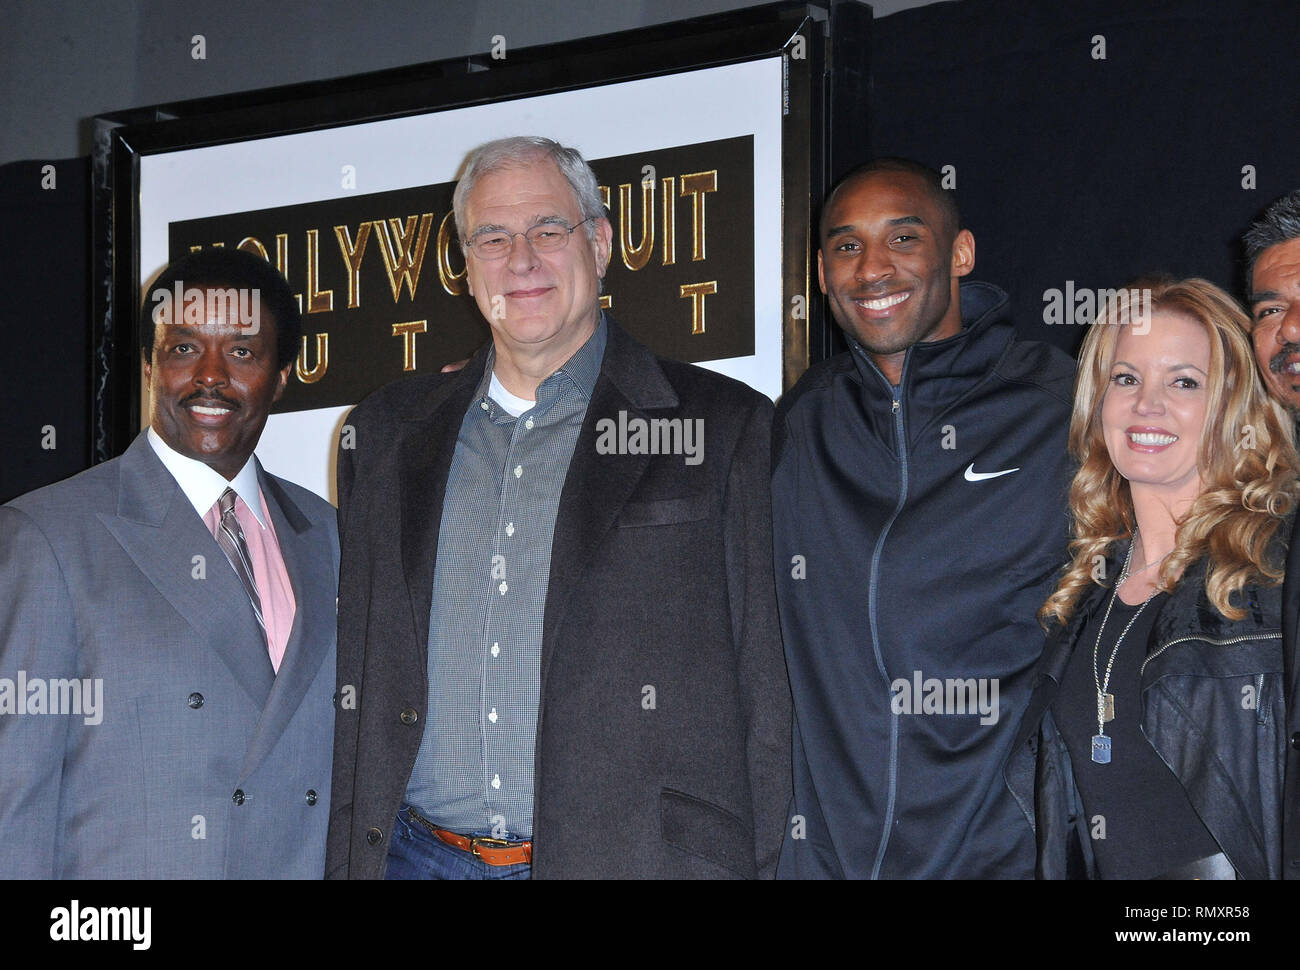 Jim Hill, Phil Jackson, Kobe Bryant, Jeanie Buss   at Kobe Bryant Hand and Foot Print Ceremony at The Chinese Theatre In Los Angeles.Jim Hill, Phil Jackson, Kobe Bryant, George Lopez  44  Event in Hollywood Life - California, Red Carpet Event, USA, Film Industry, Celebrities, Photography, Bestof, Arts Culture and Entertainment, Topix Celebrities fashion, Best of, Hollywood Life, Event in Hollywood Life - California, Red Carpet and backstage, movie celebrities, TV celebrities, Music celebrities, Topix, actors from the same movie, cast and co star together.  inquiry tsuni@Gamma-USA.com, Credit T Stock Photo